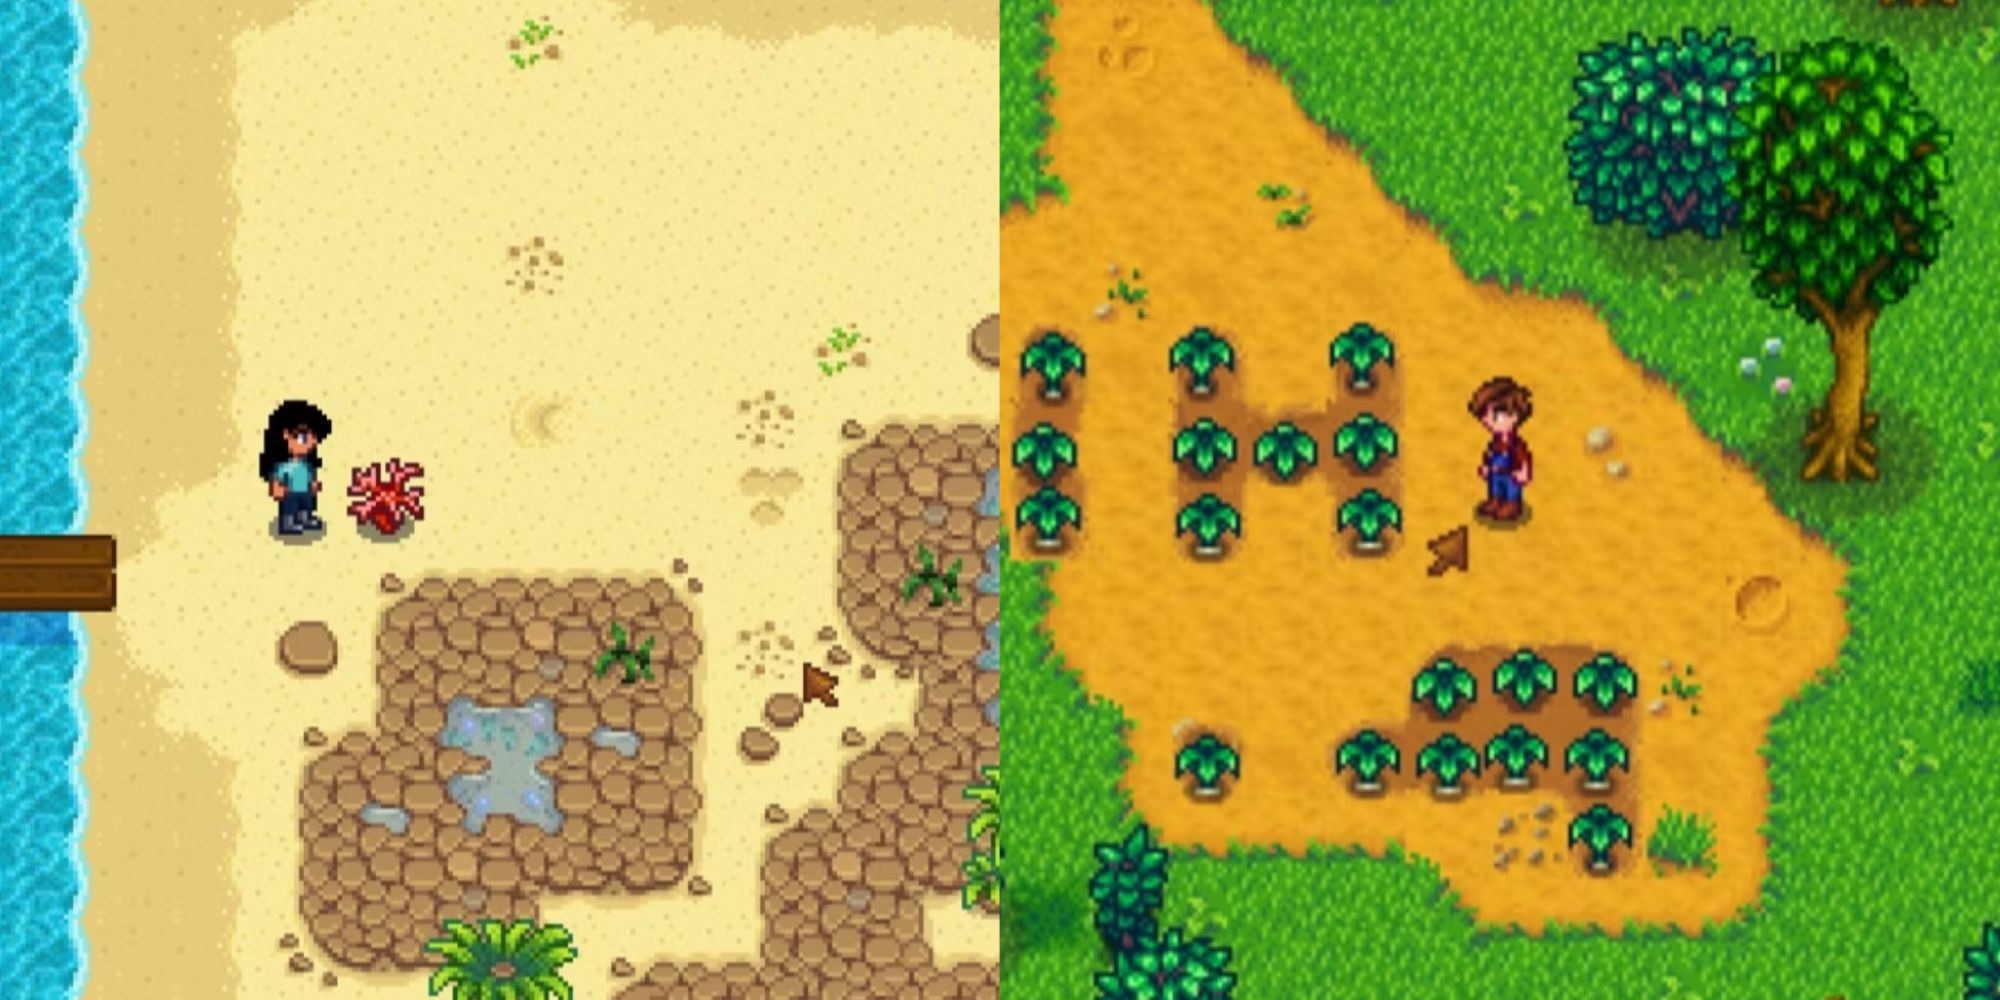 A split screen with two screenshots of Stardew Valley, one showing a beach and foraged shell and the other showing the woods